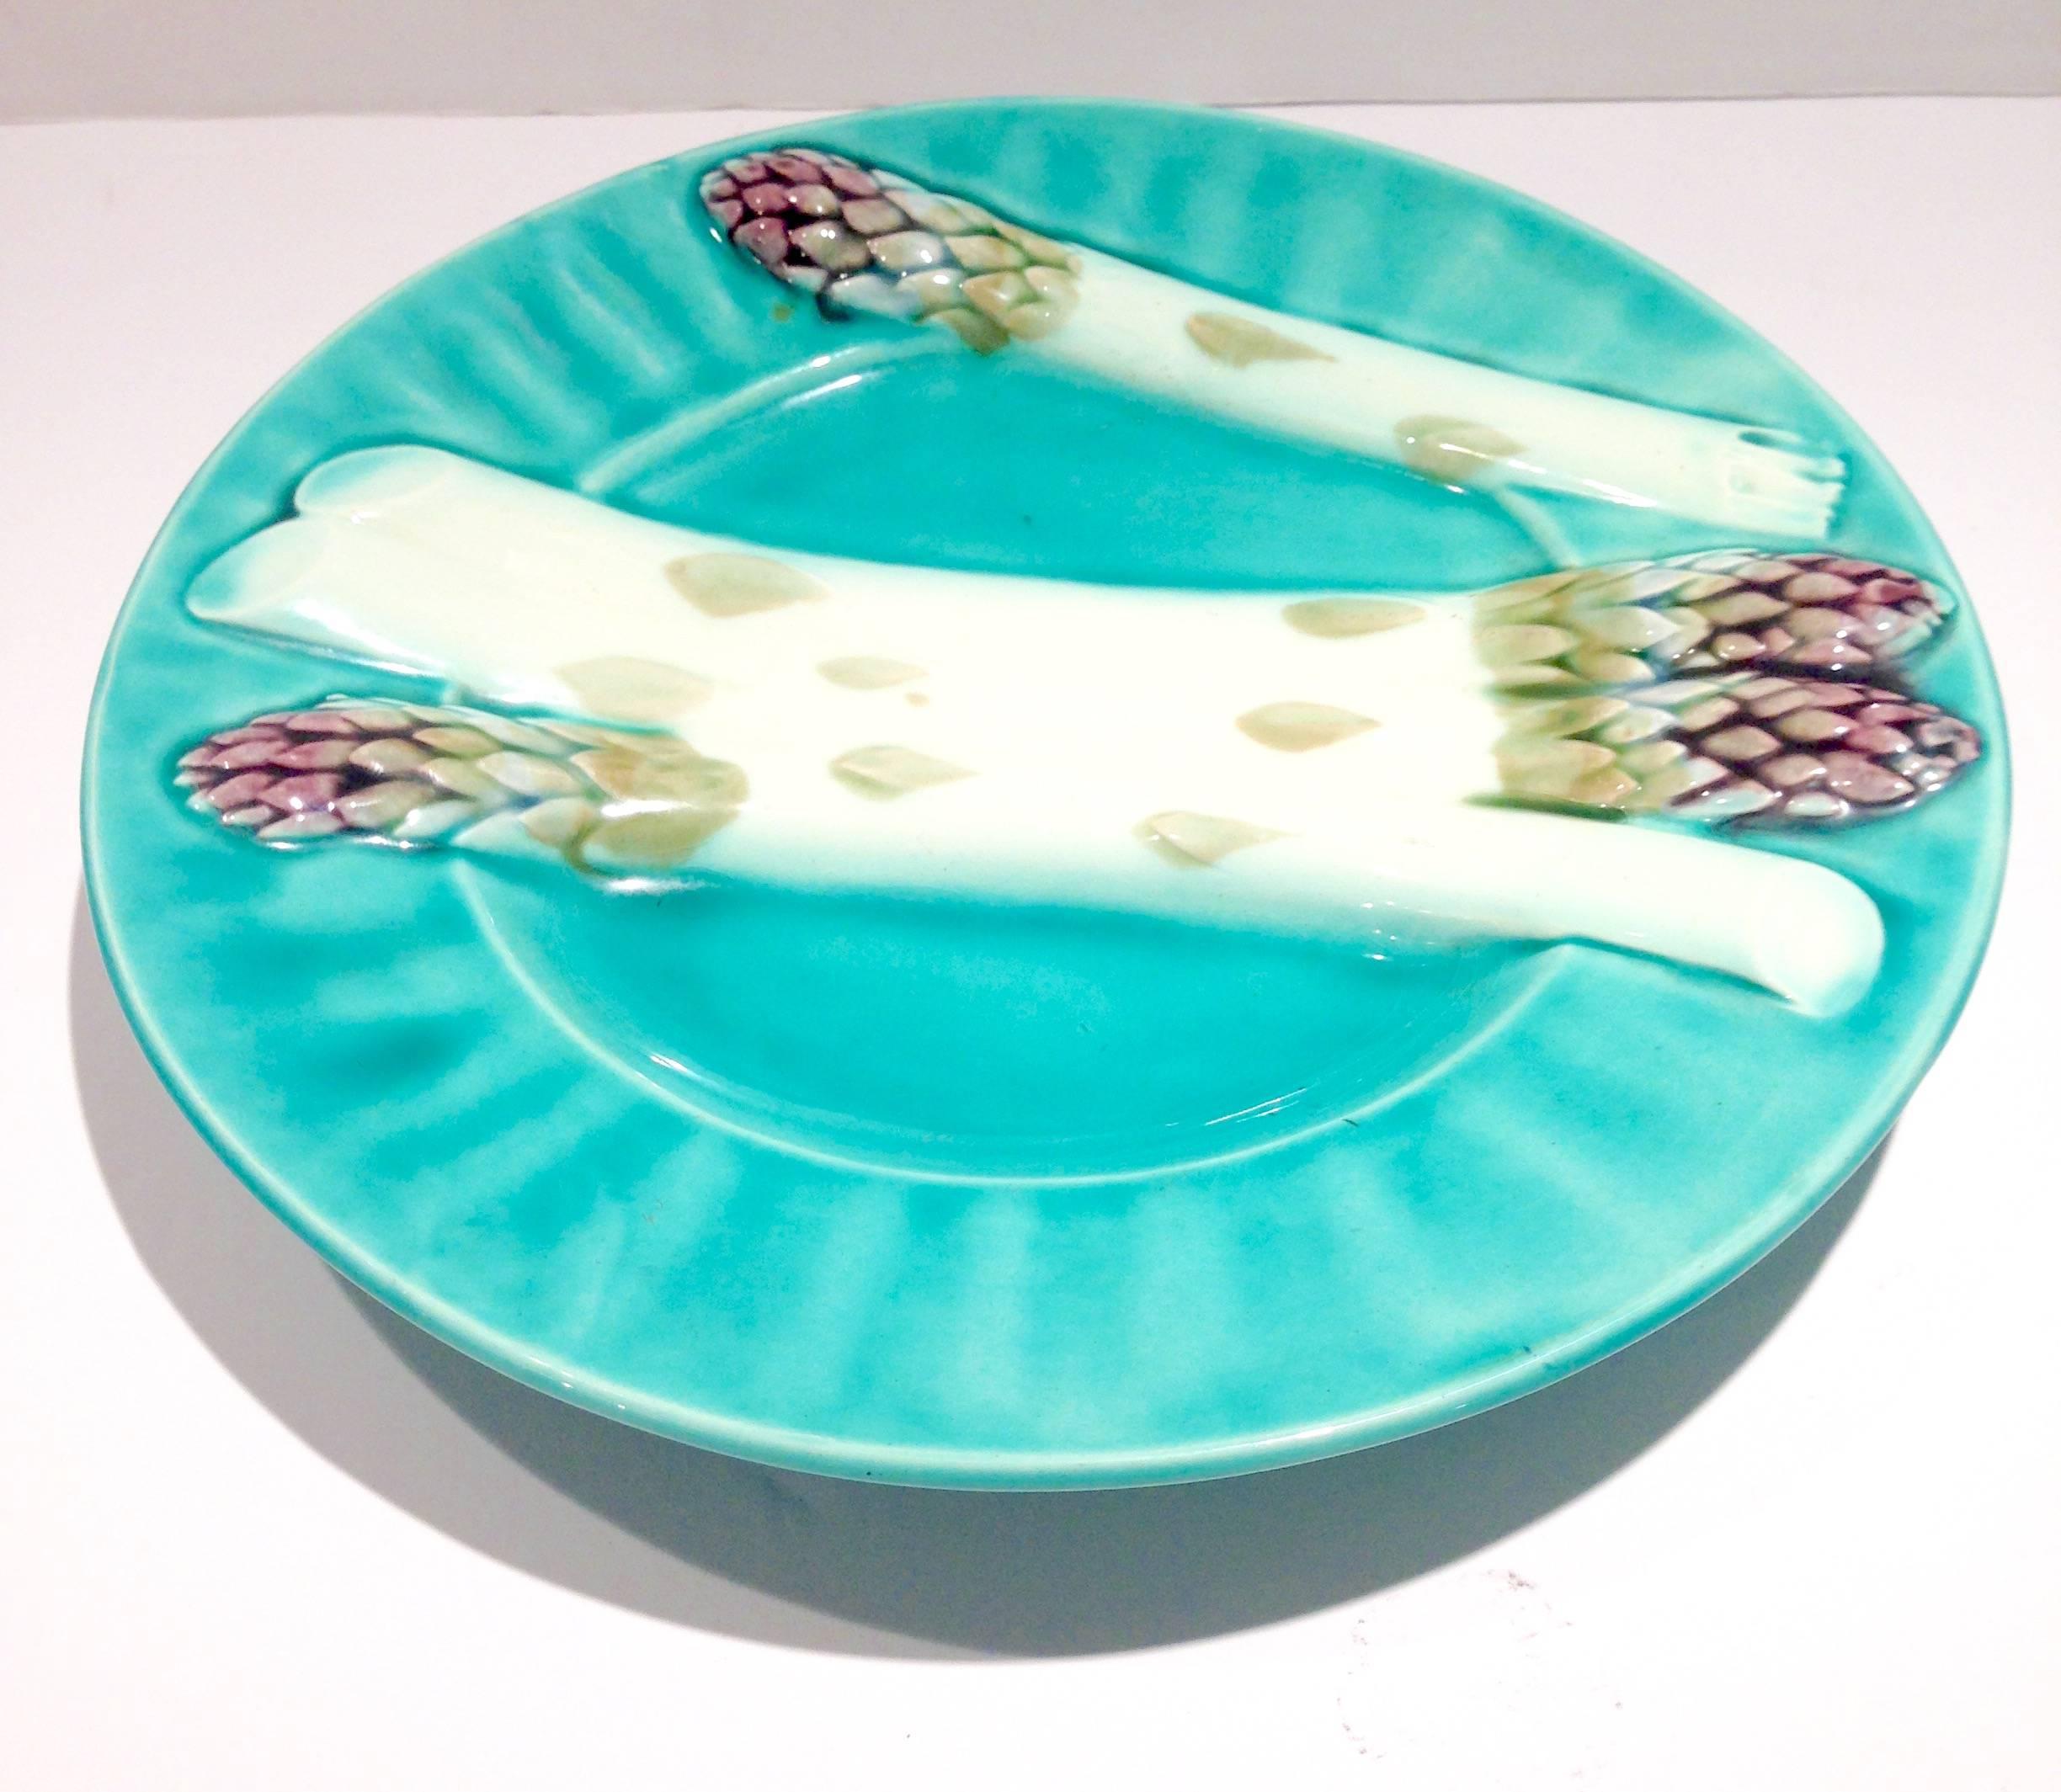 Early 1900'S Tturquoise French Majolica asparagus plate with white, green and purple asparagus relief design. Signed on the underside, Depose K et G Lunville.